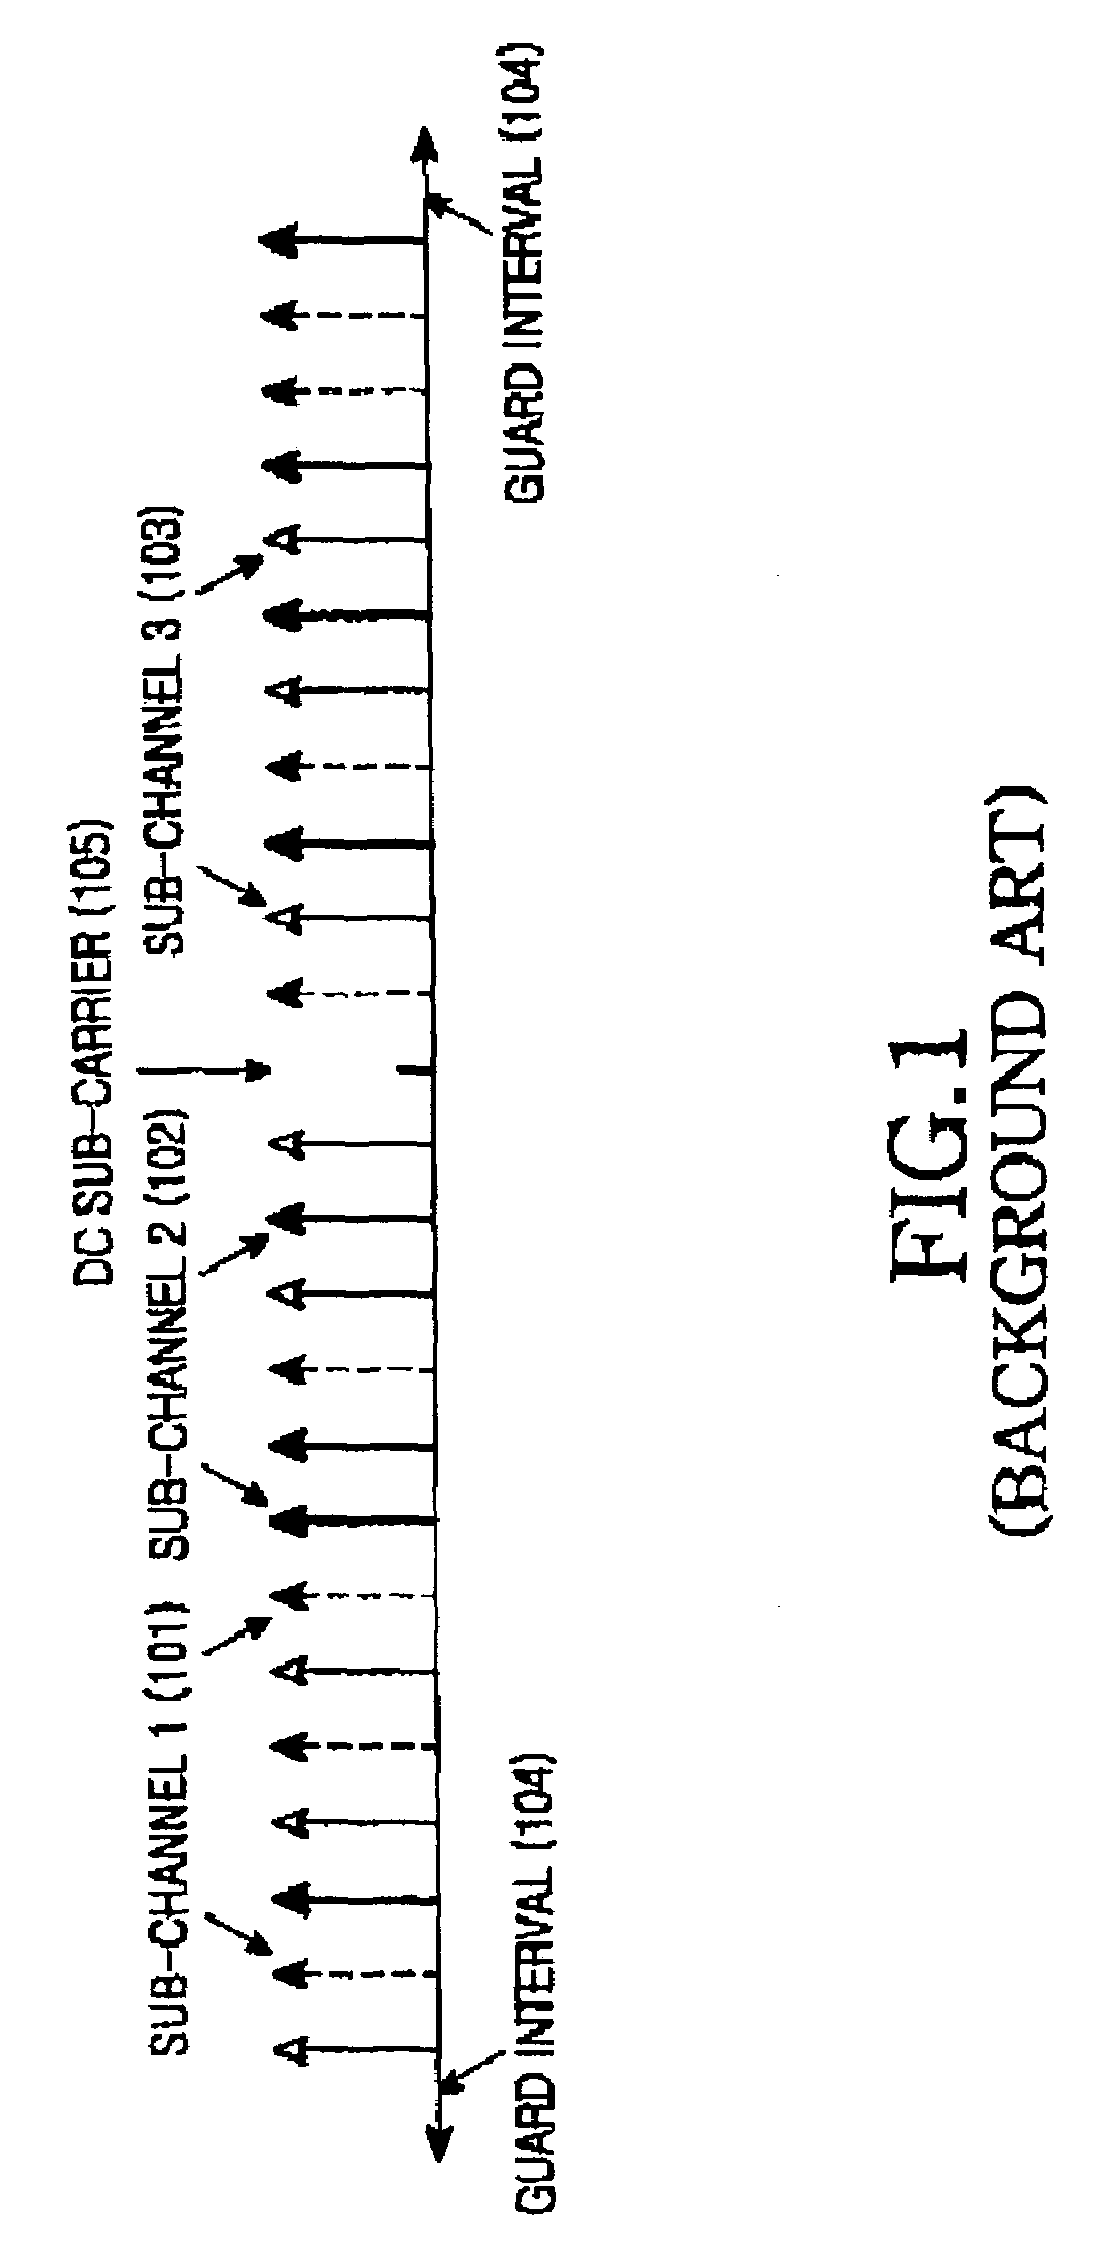 Method and apparatus for allocating a pilot carrier adaptively in an orthogonal frequency division multiple access system